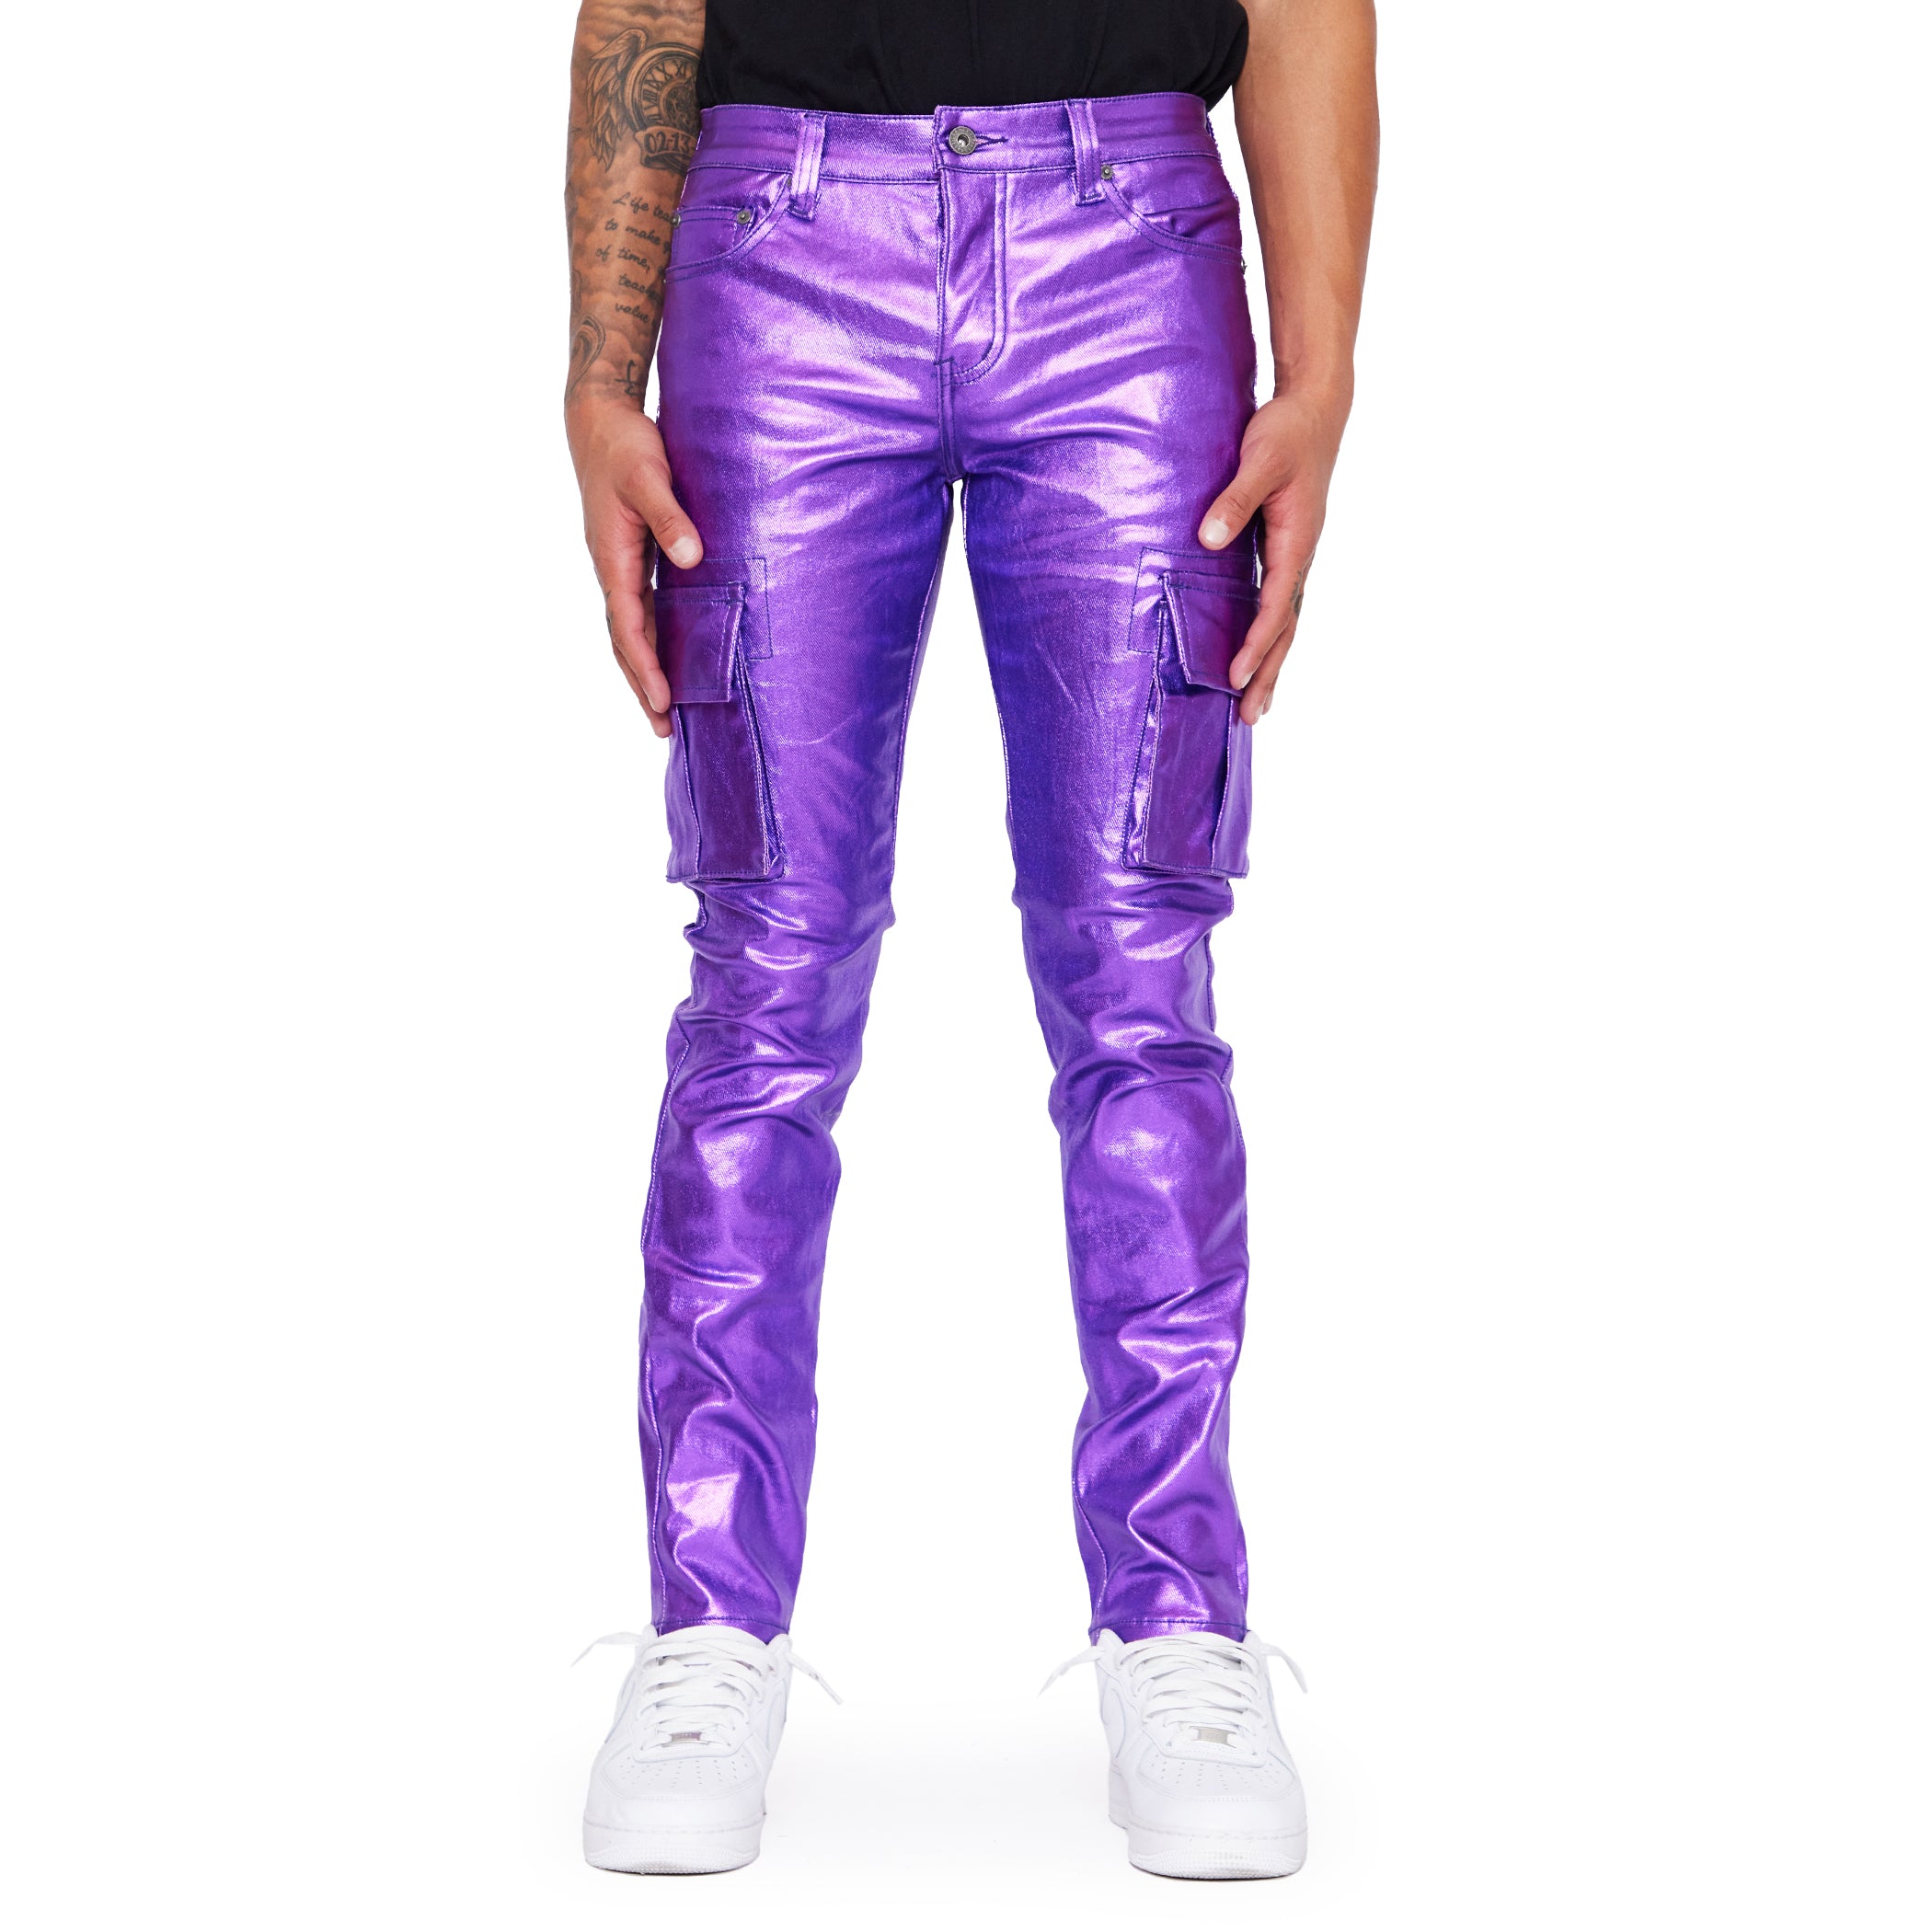 factory outlet online PURPLE Brand Men's Waxed Skinny Jeans - Size 34 (BRAND  NEW WITH TAGS)